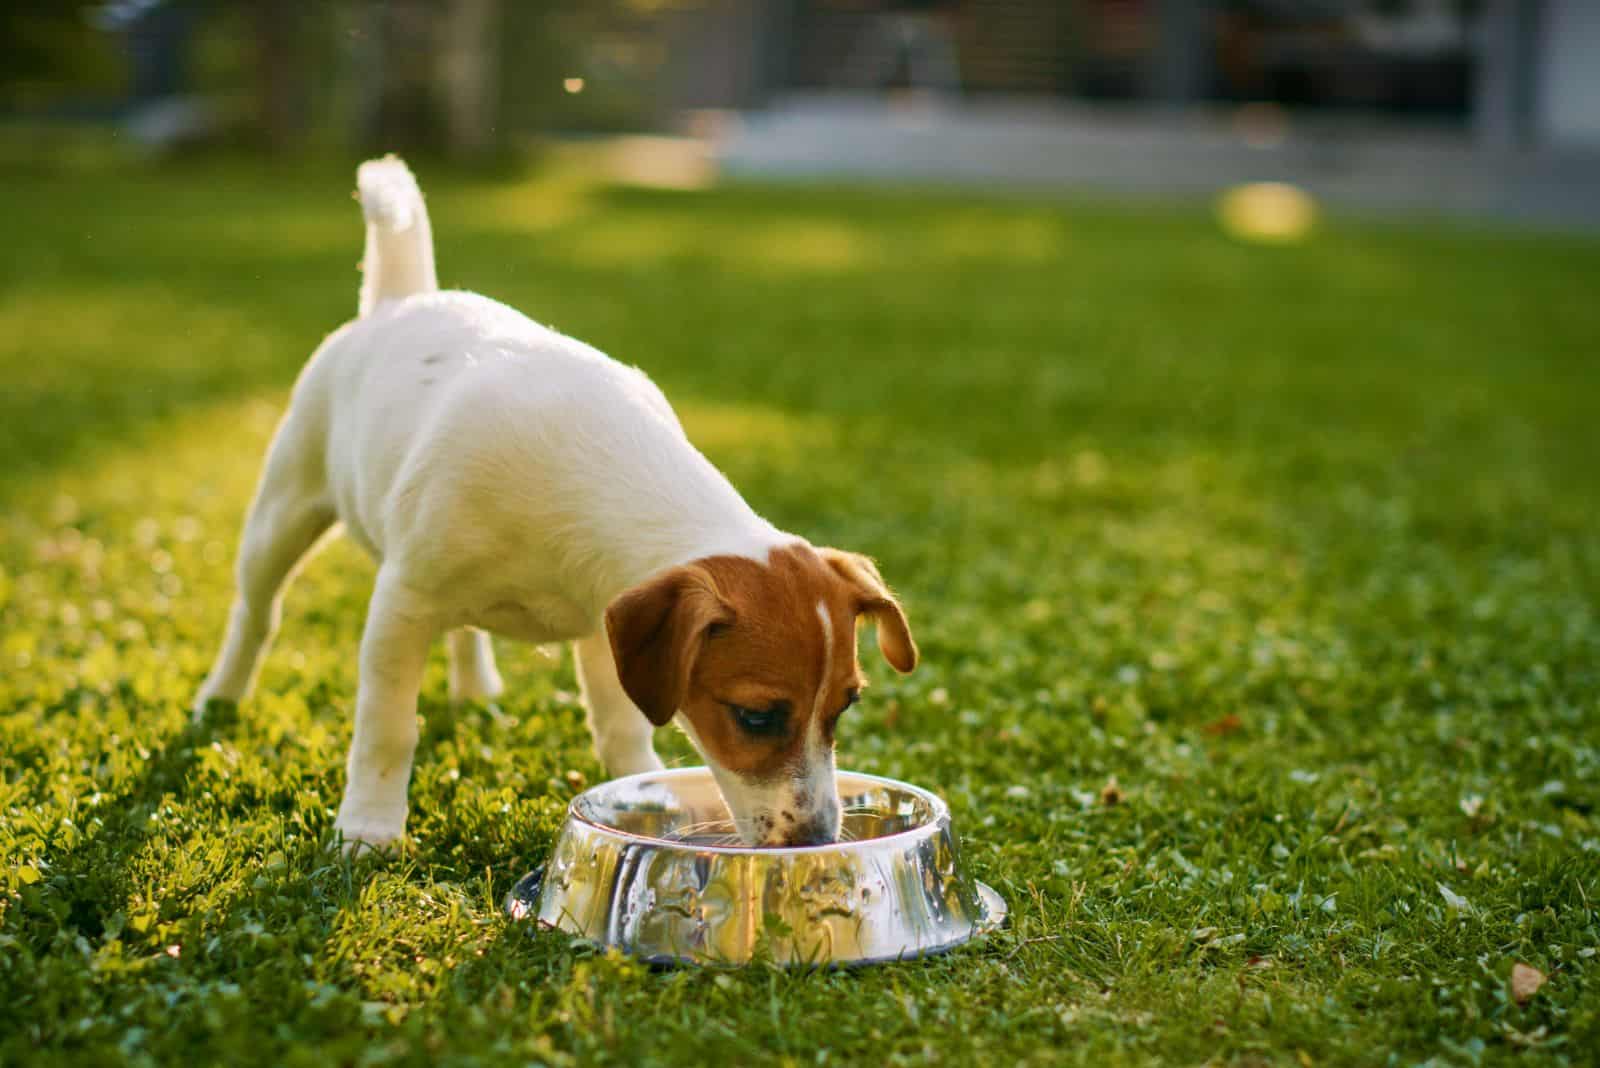 the dog drinks water from the bowl 